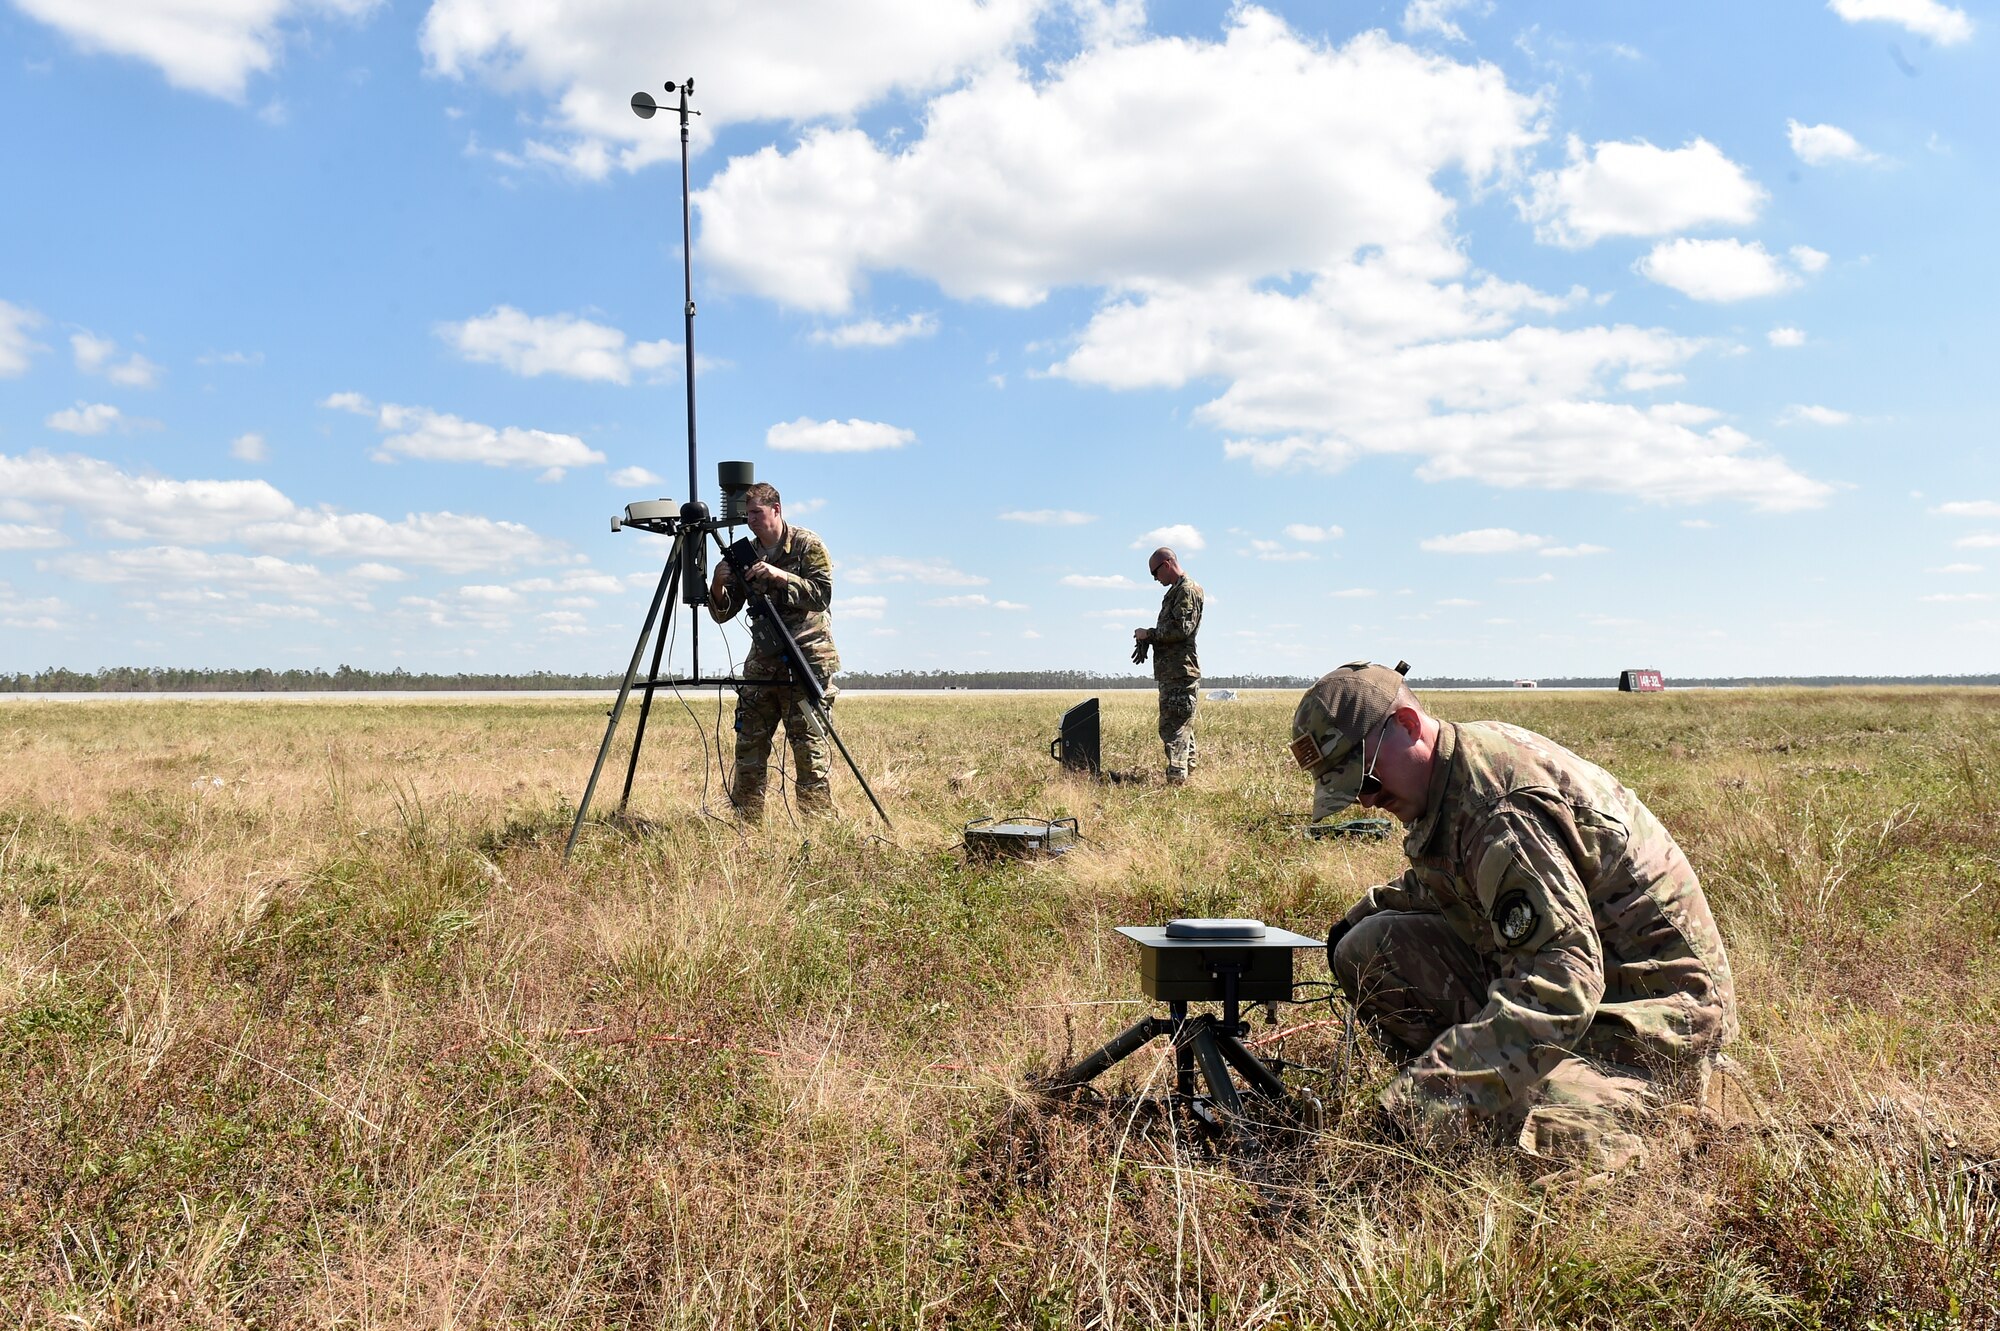 Weather personnel from the 821st Contingency Response Group and 2nd Combat Weather Systems Squadron set up a tactical meteorological observation system, Oct. 14, 2018, at Tyndall Air Force Base, Florida, in the aftermath of Hurricane Michael. The hurricane ripped through the base and the surrounding area causing severe damage. (U.S. Air Force photo by Tech. Sgt. Liliana Moreno)